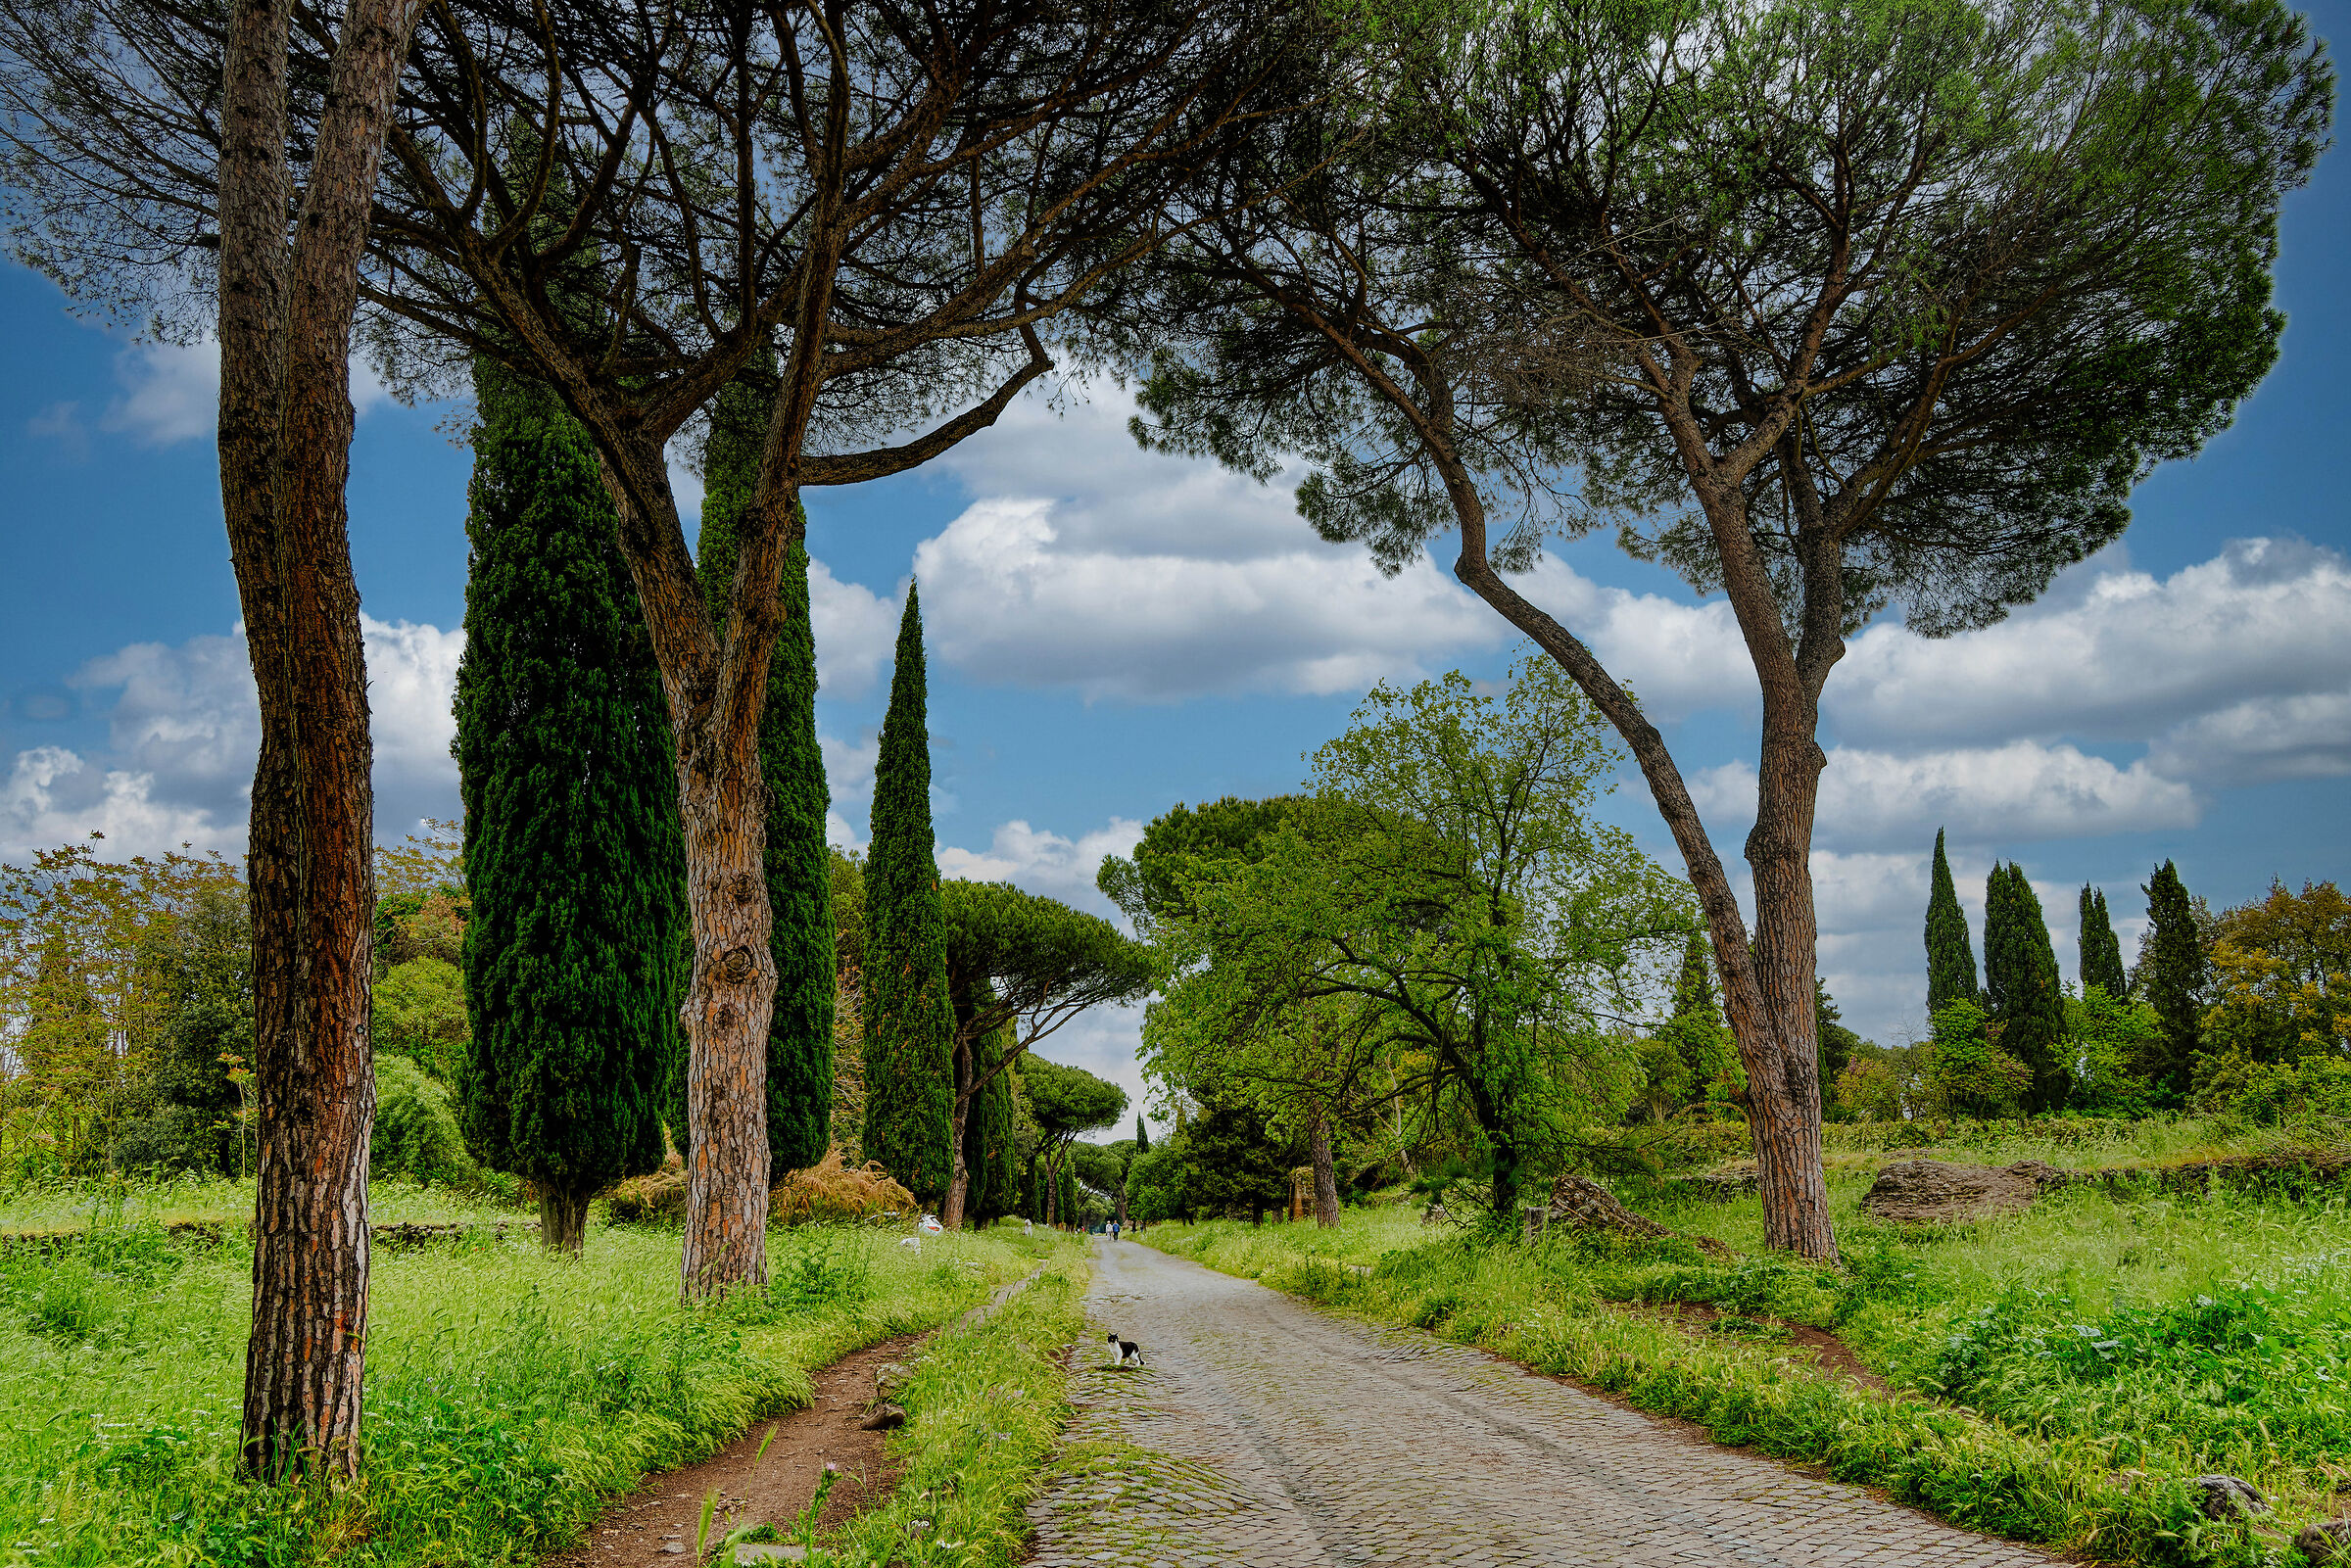 The Appian Way in Rome: find the cat...